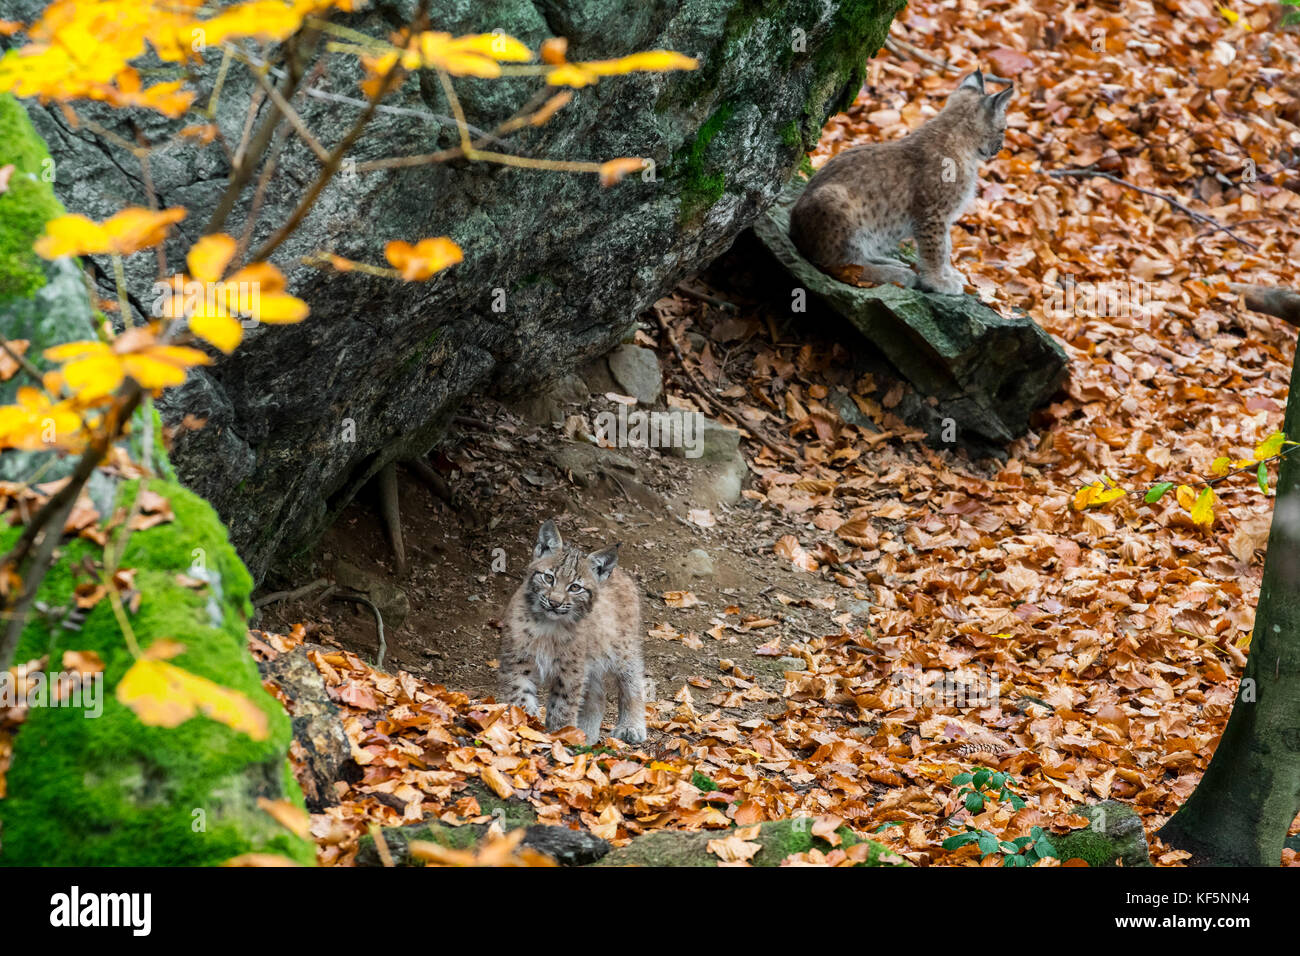 Two 2 months old Eurasian lynx (Lynx lynx) kittens at entrance of den in autumn forest Stock Photo